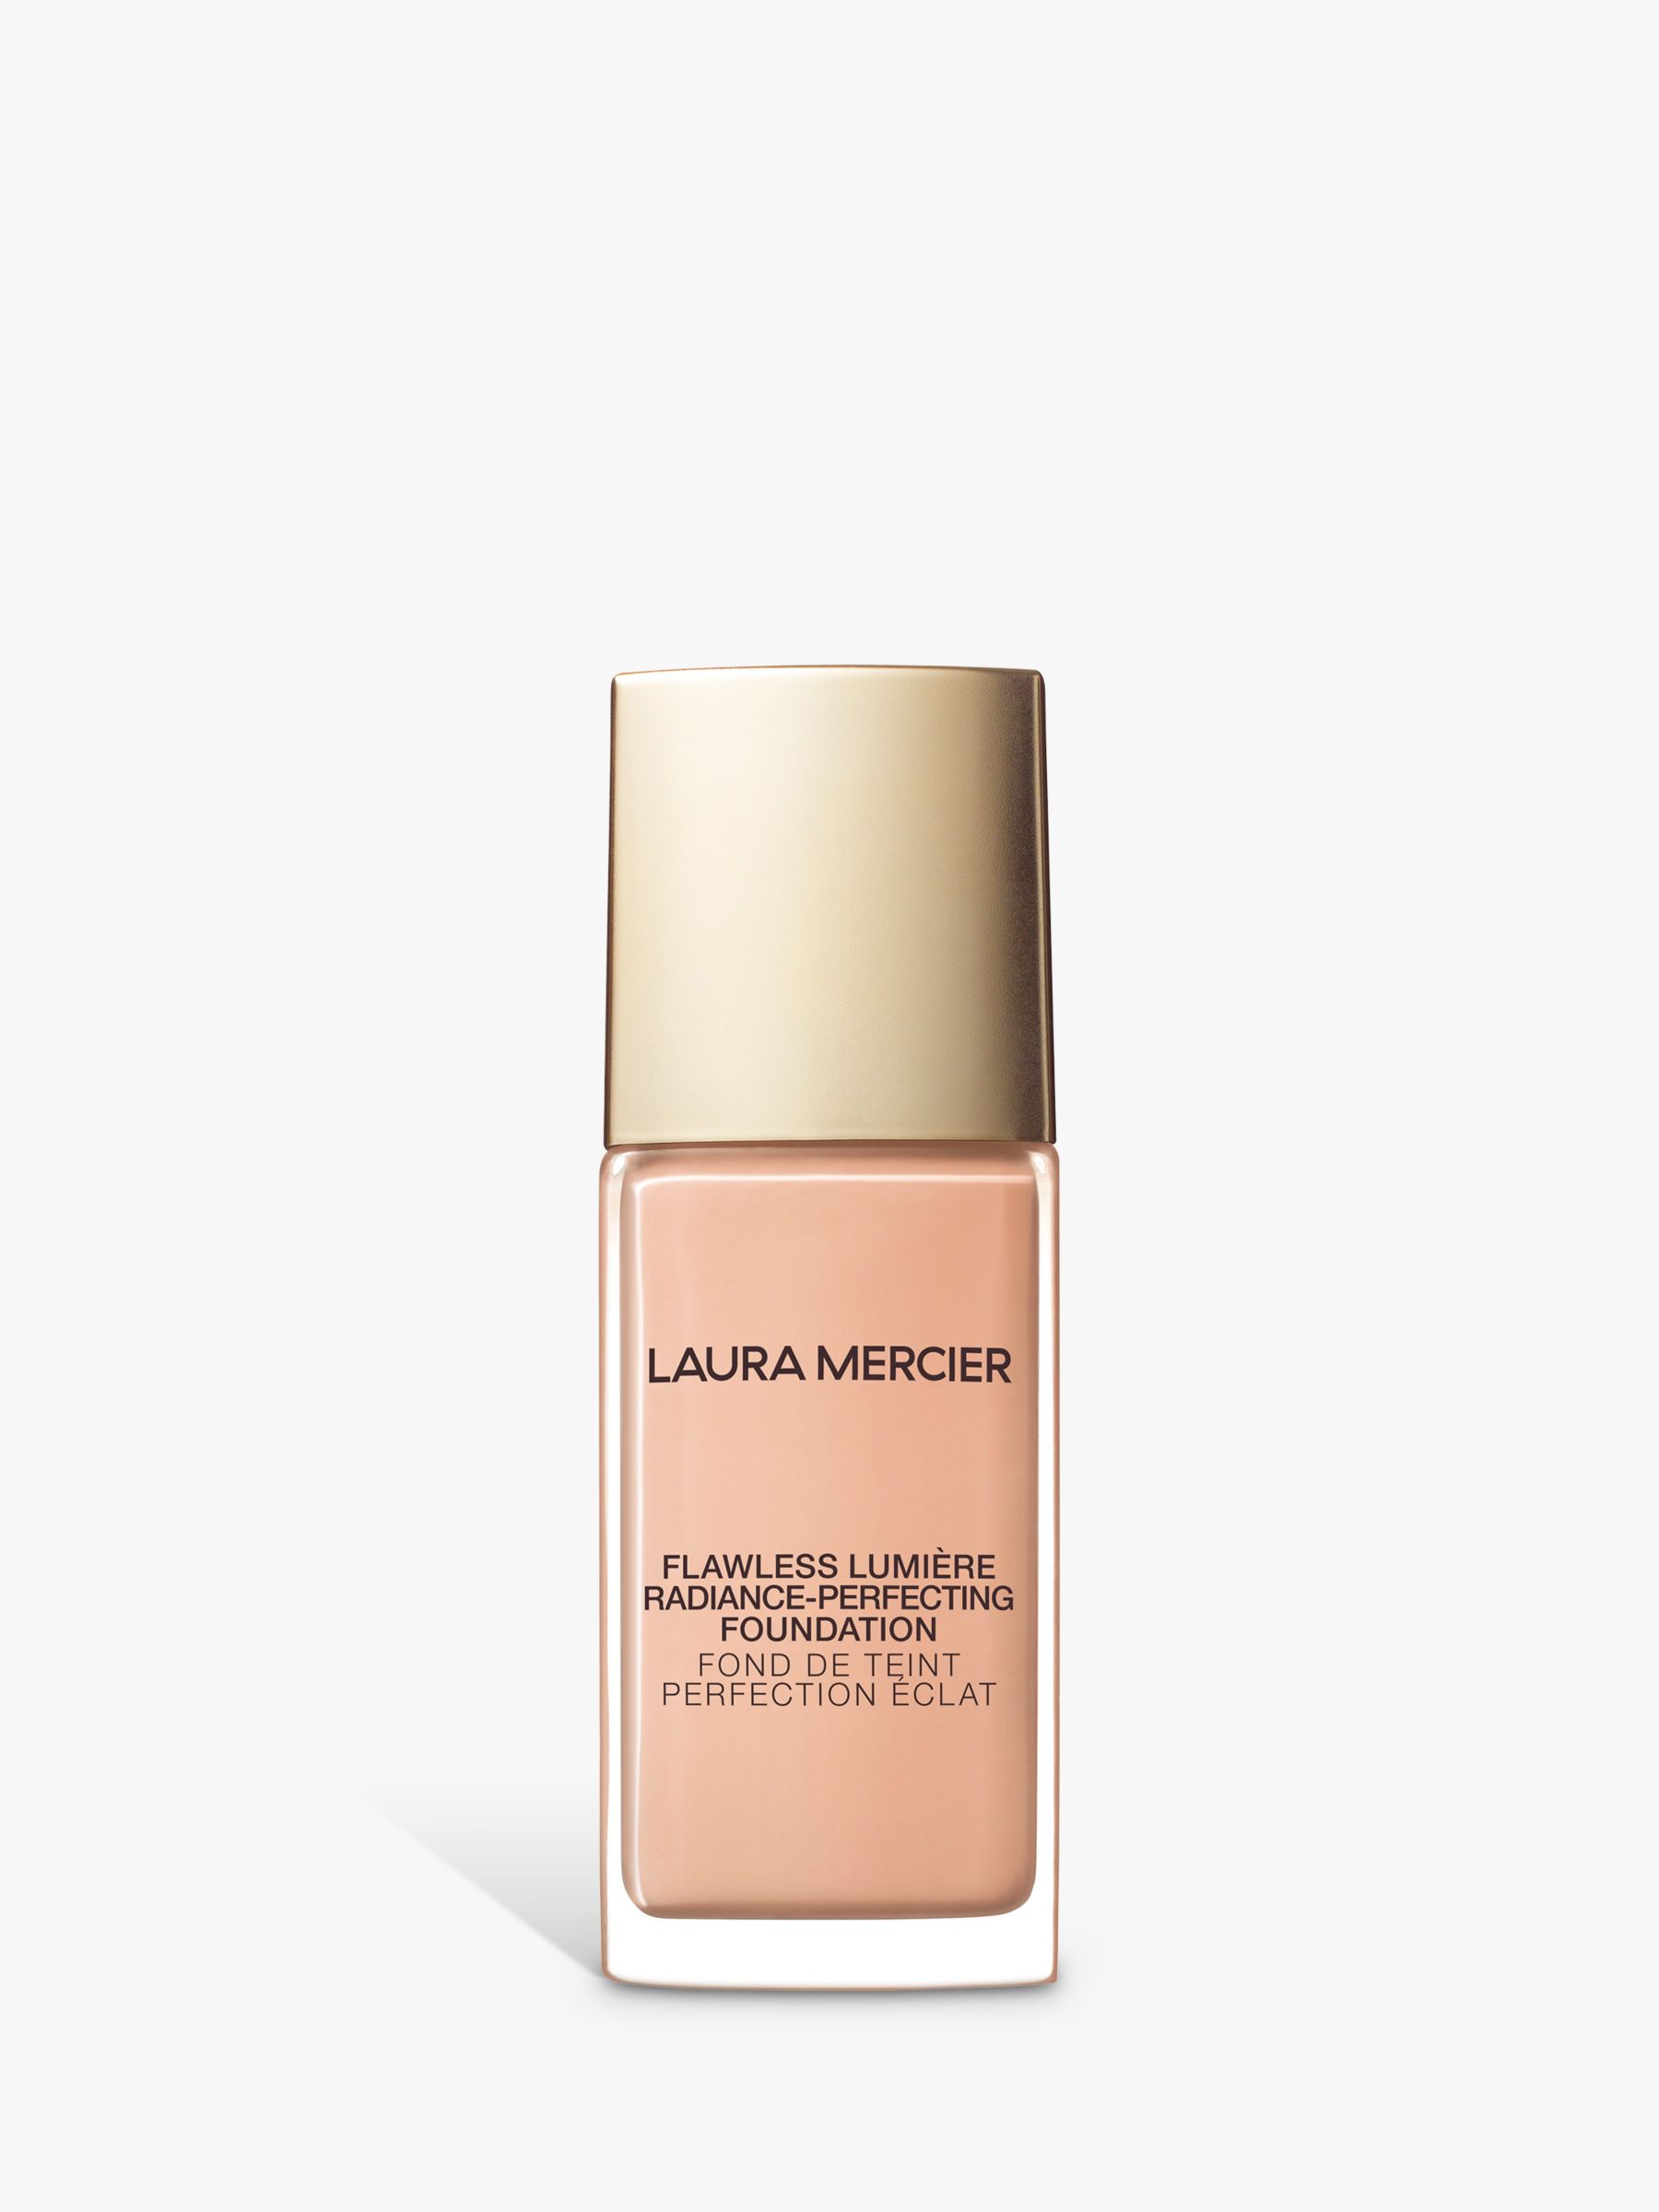 Laura Mercier Flawless Lumière Radiance-Perfecting Foundation, 0C1